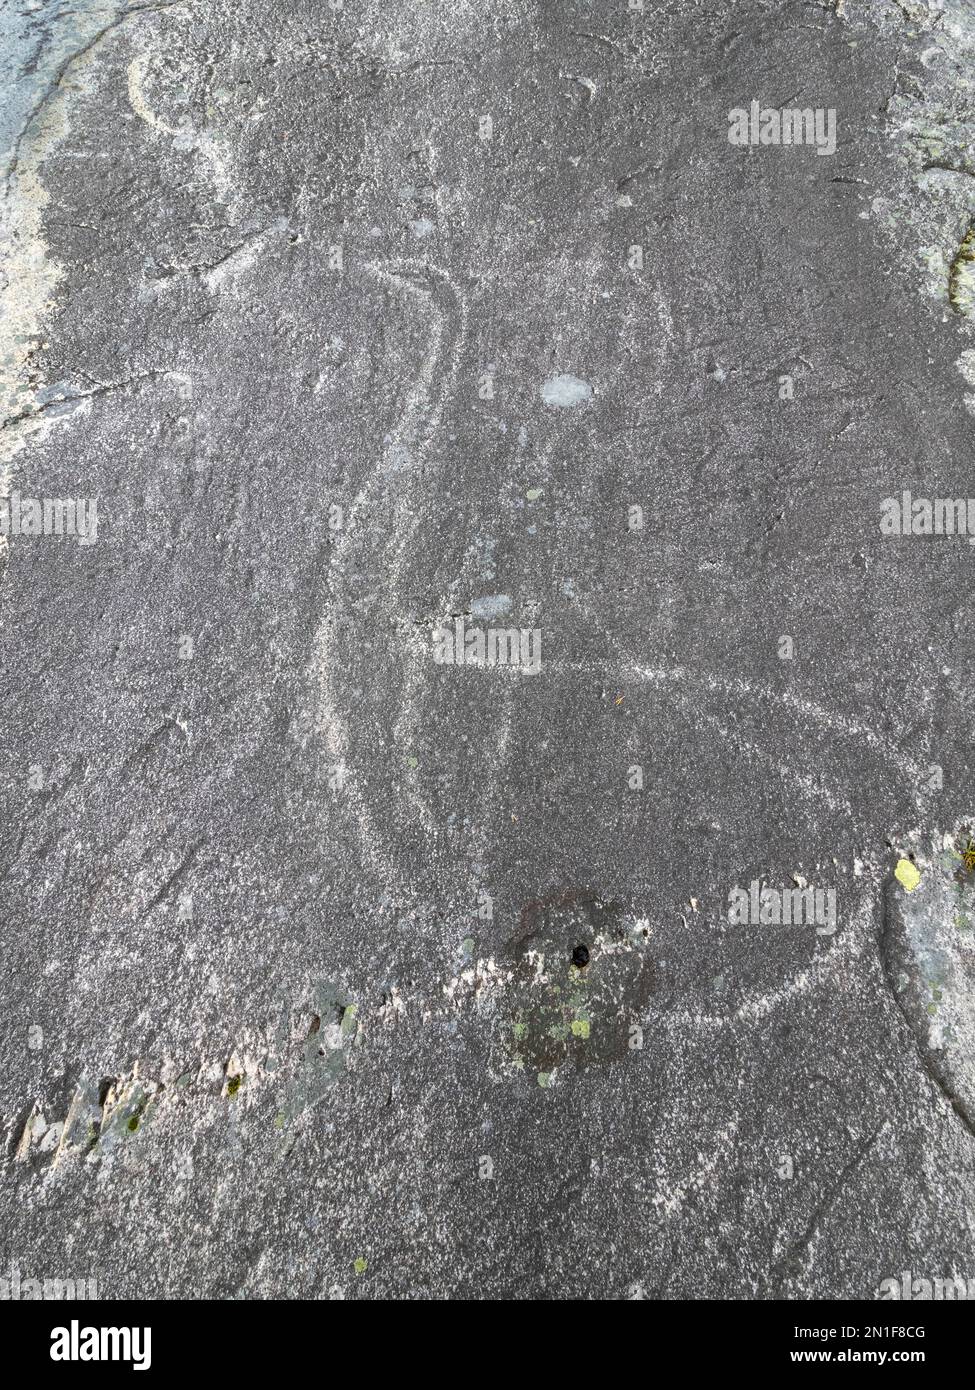 Prehistoric rock carvings, petroglyphs, at Leiknes, showing scenes from hunting, Norway, Scandinavia, Europe Stock Photo